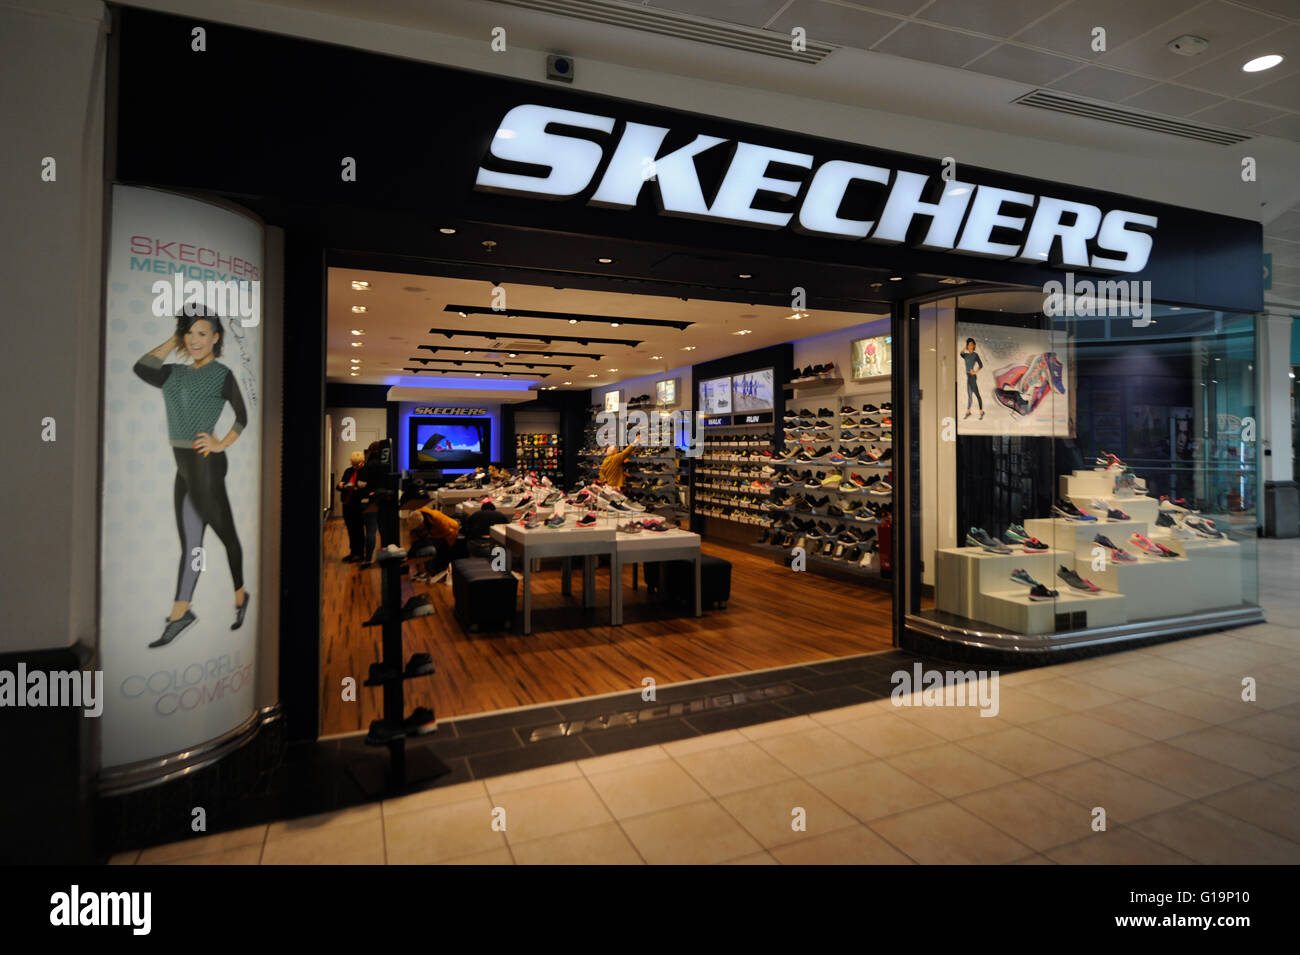 skechers factory outlet stores uk